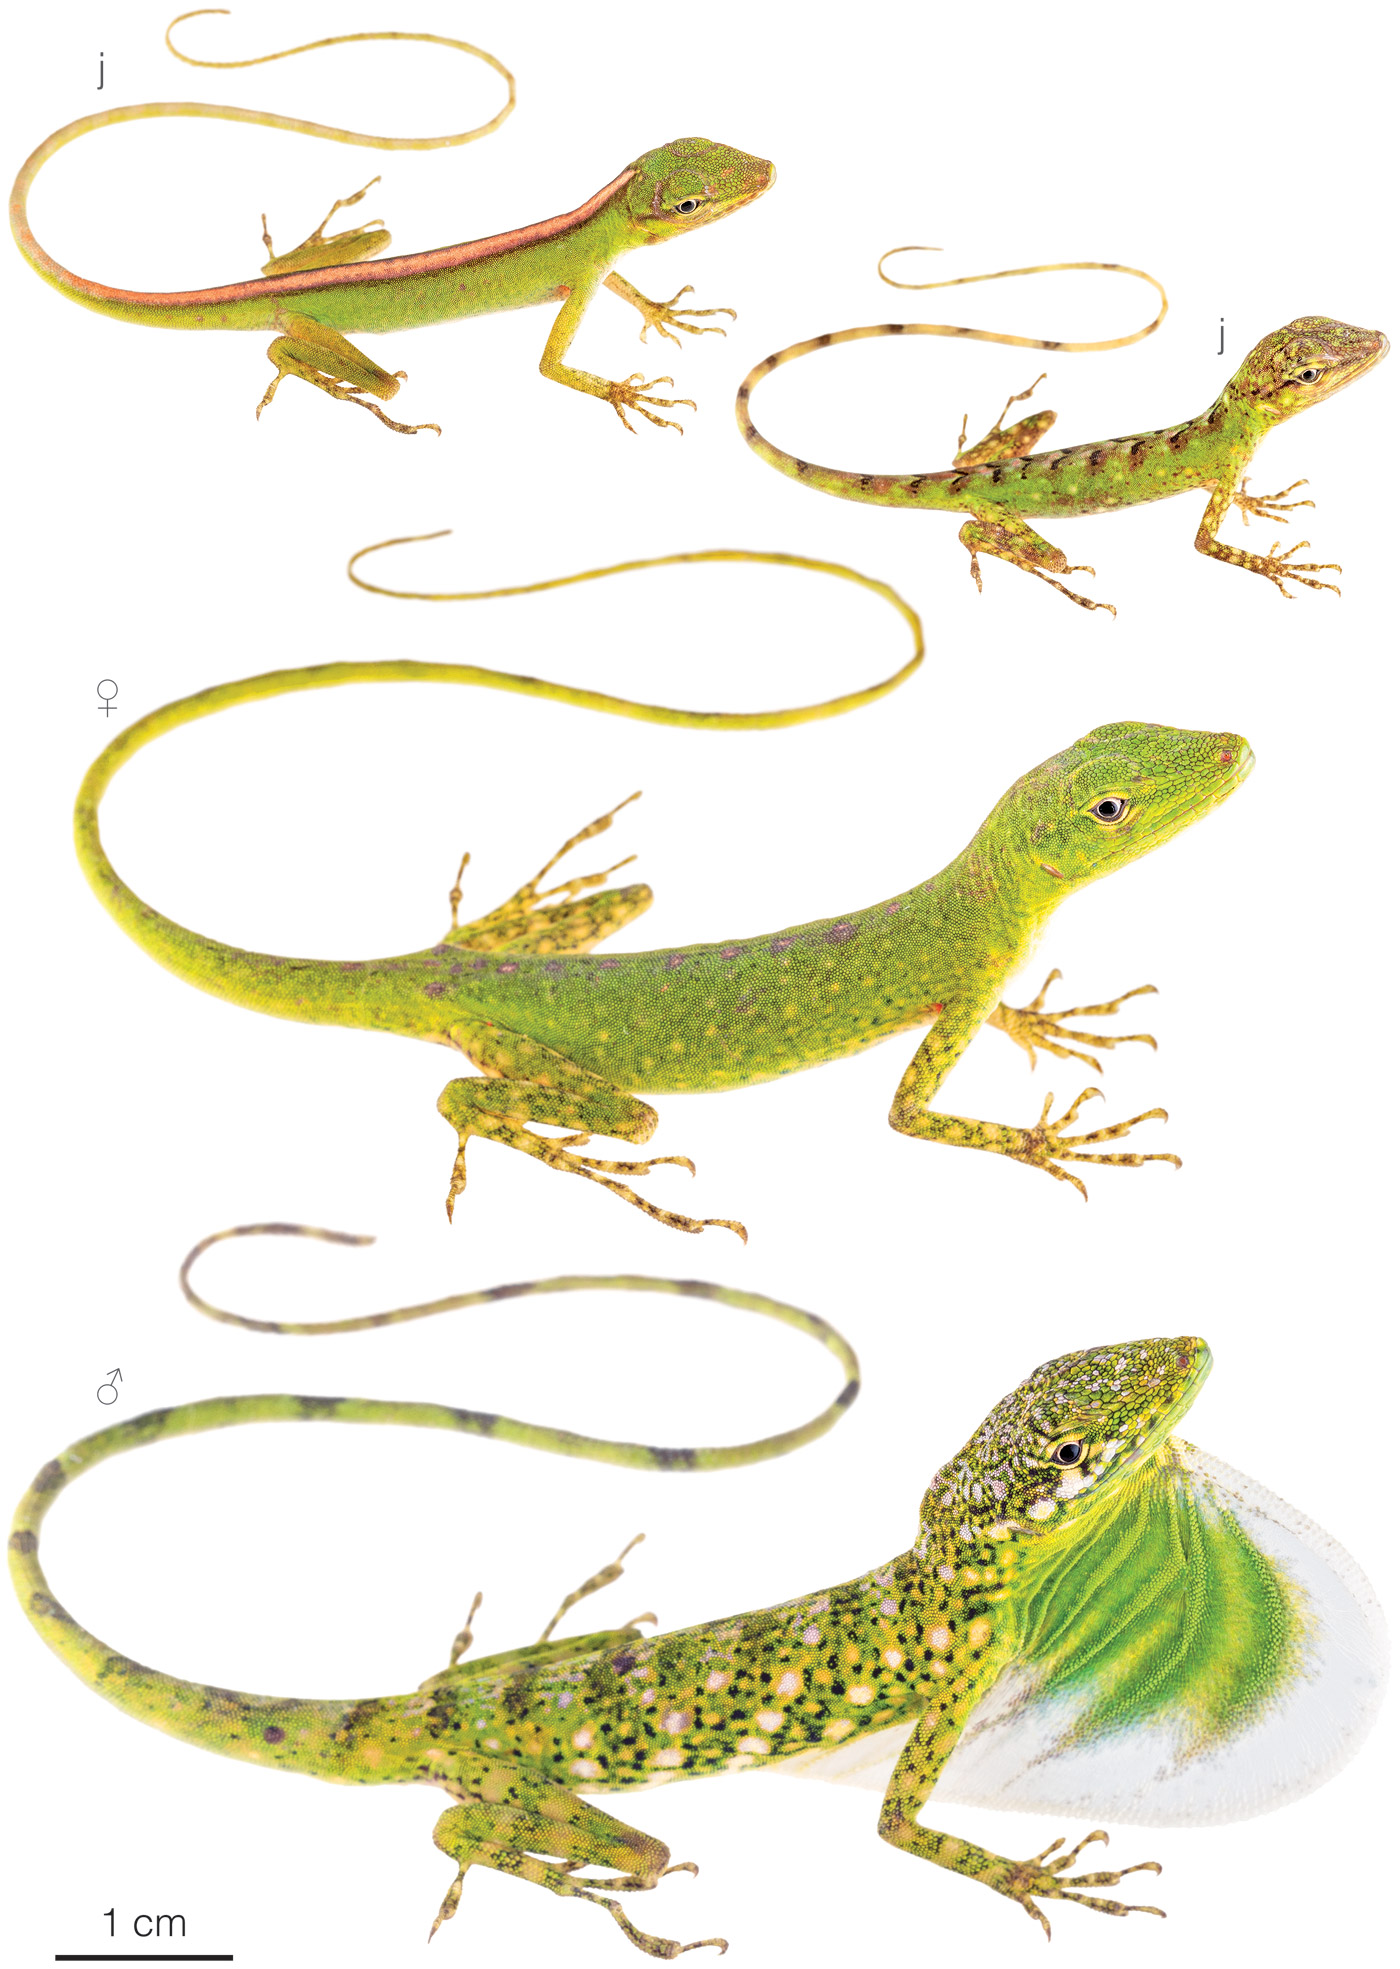 Figure showing variation among individuals of Anolis poei